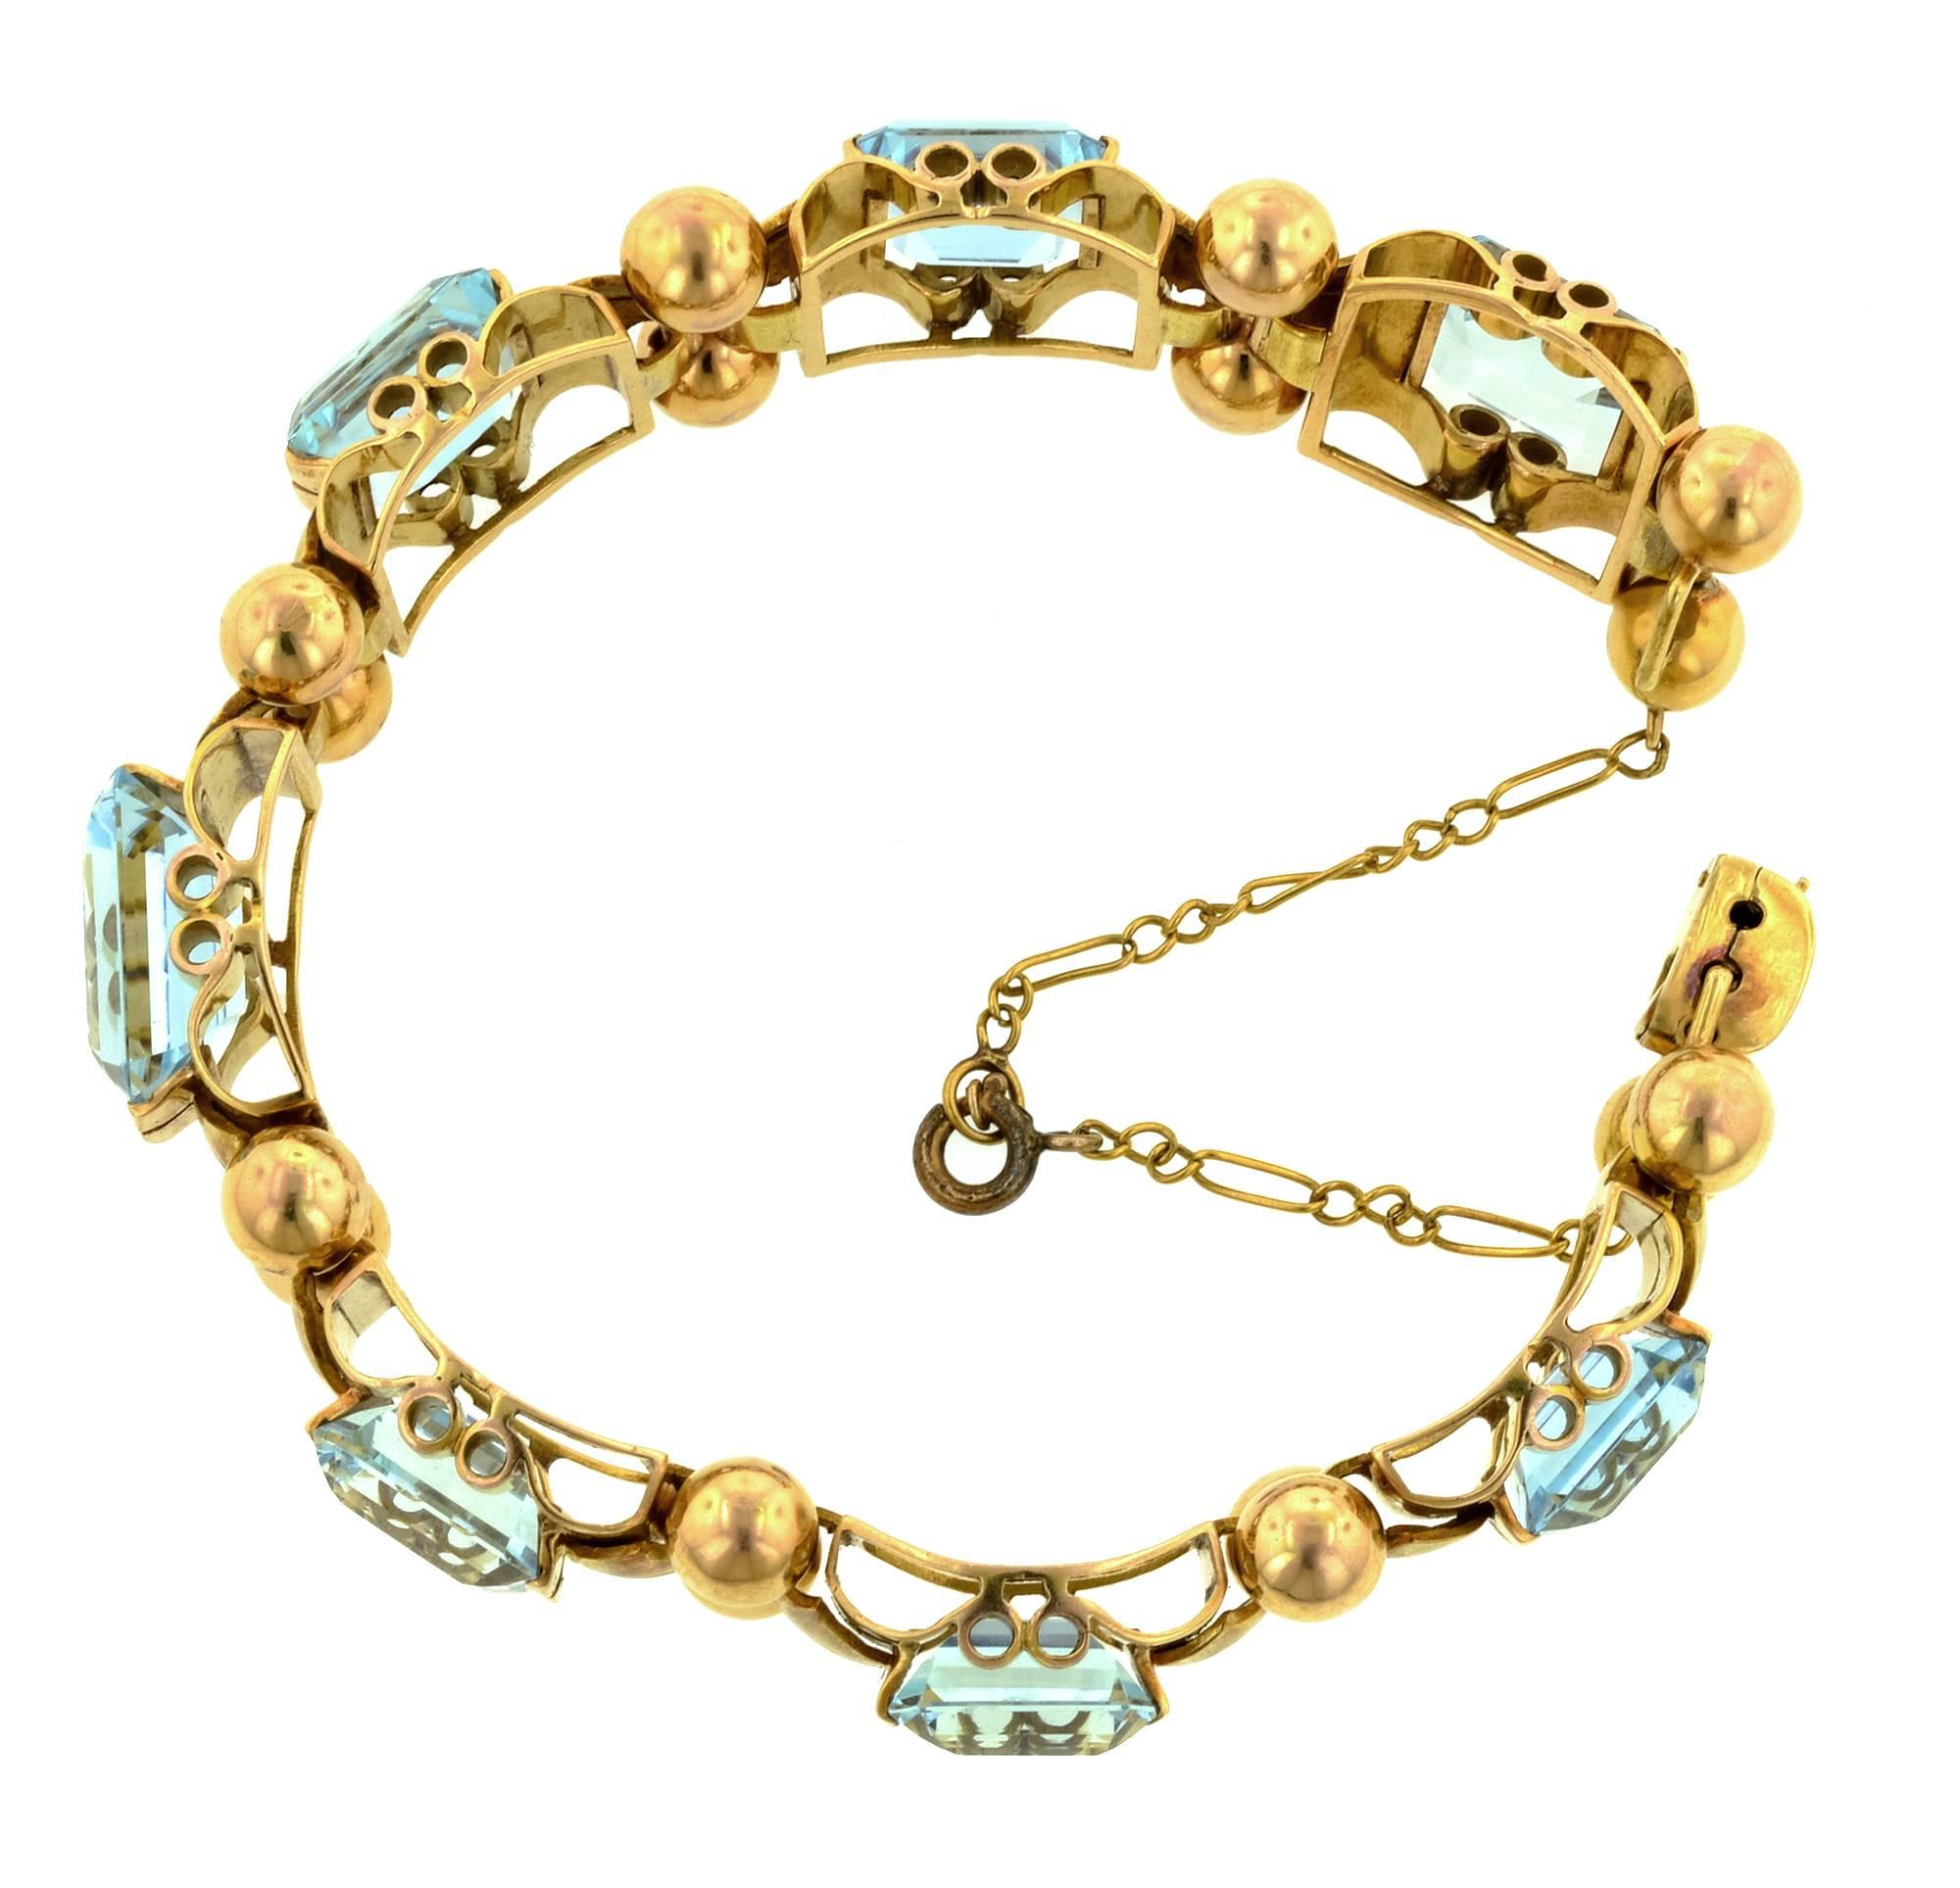 Retro aquamarine bracelet, app. 42.50ctw, measuring 7 9/16 inches in length and 9/16 inches wide; features seven graduating prong set rectangular step cut aquamarines with a combined approx. weight of 42.50ctw. Rolling fluted links with a hinged